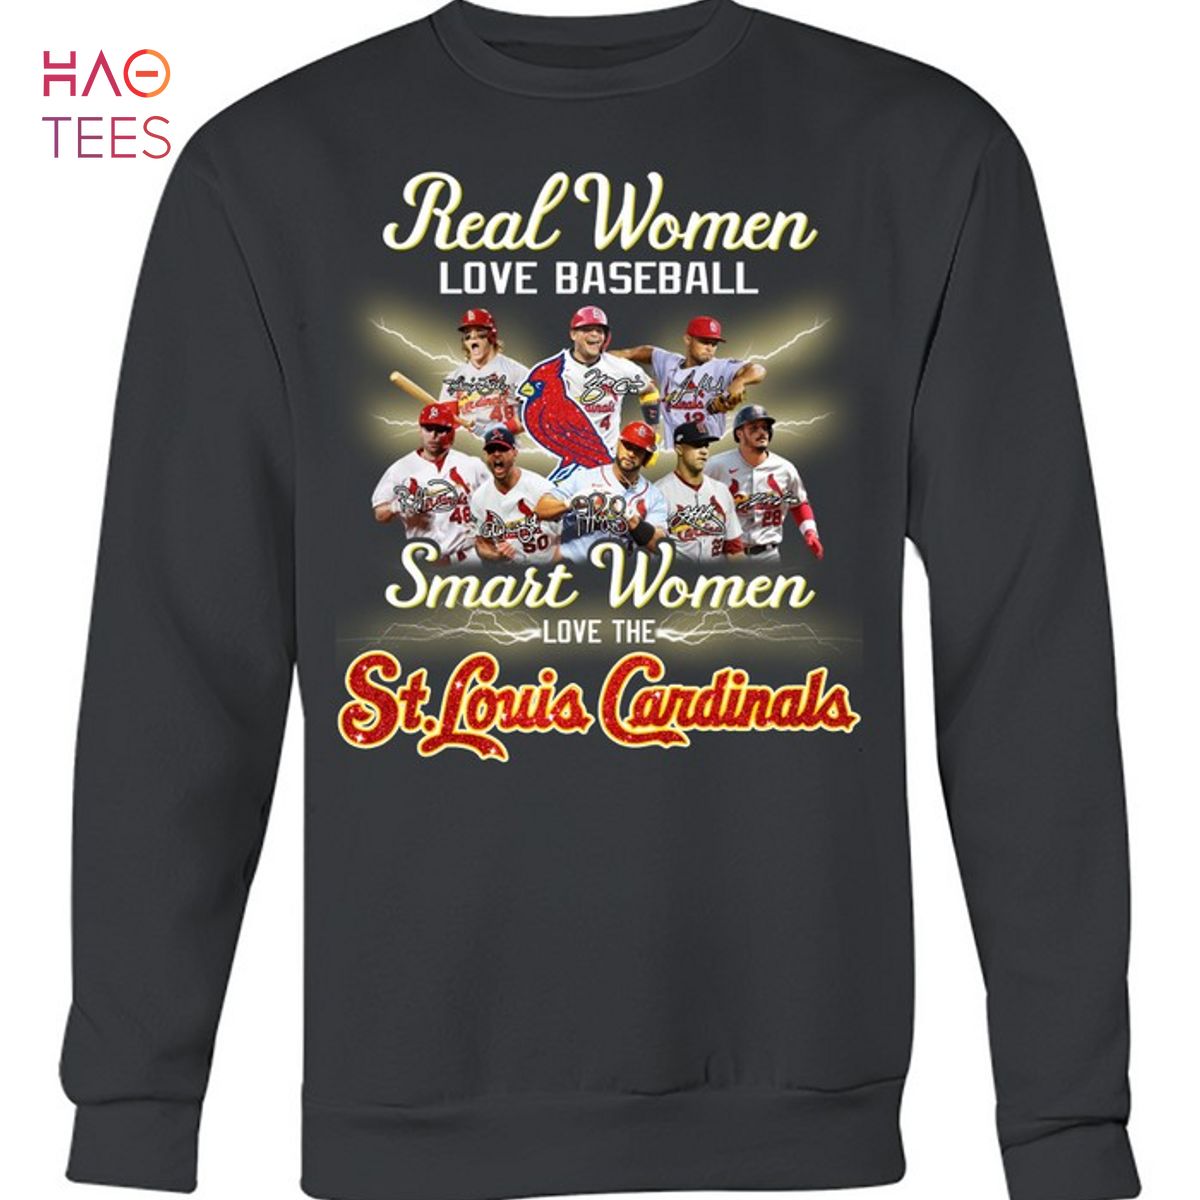 These women and all other women - St. Louis Cardinals